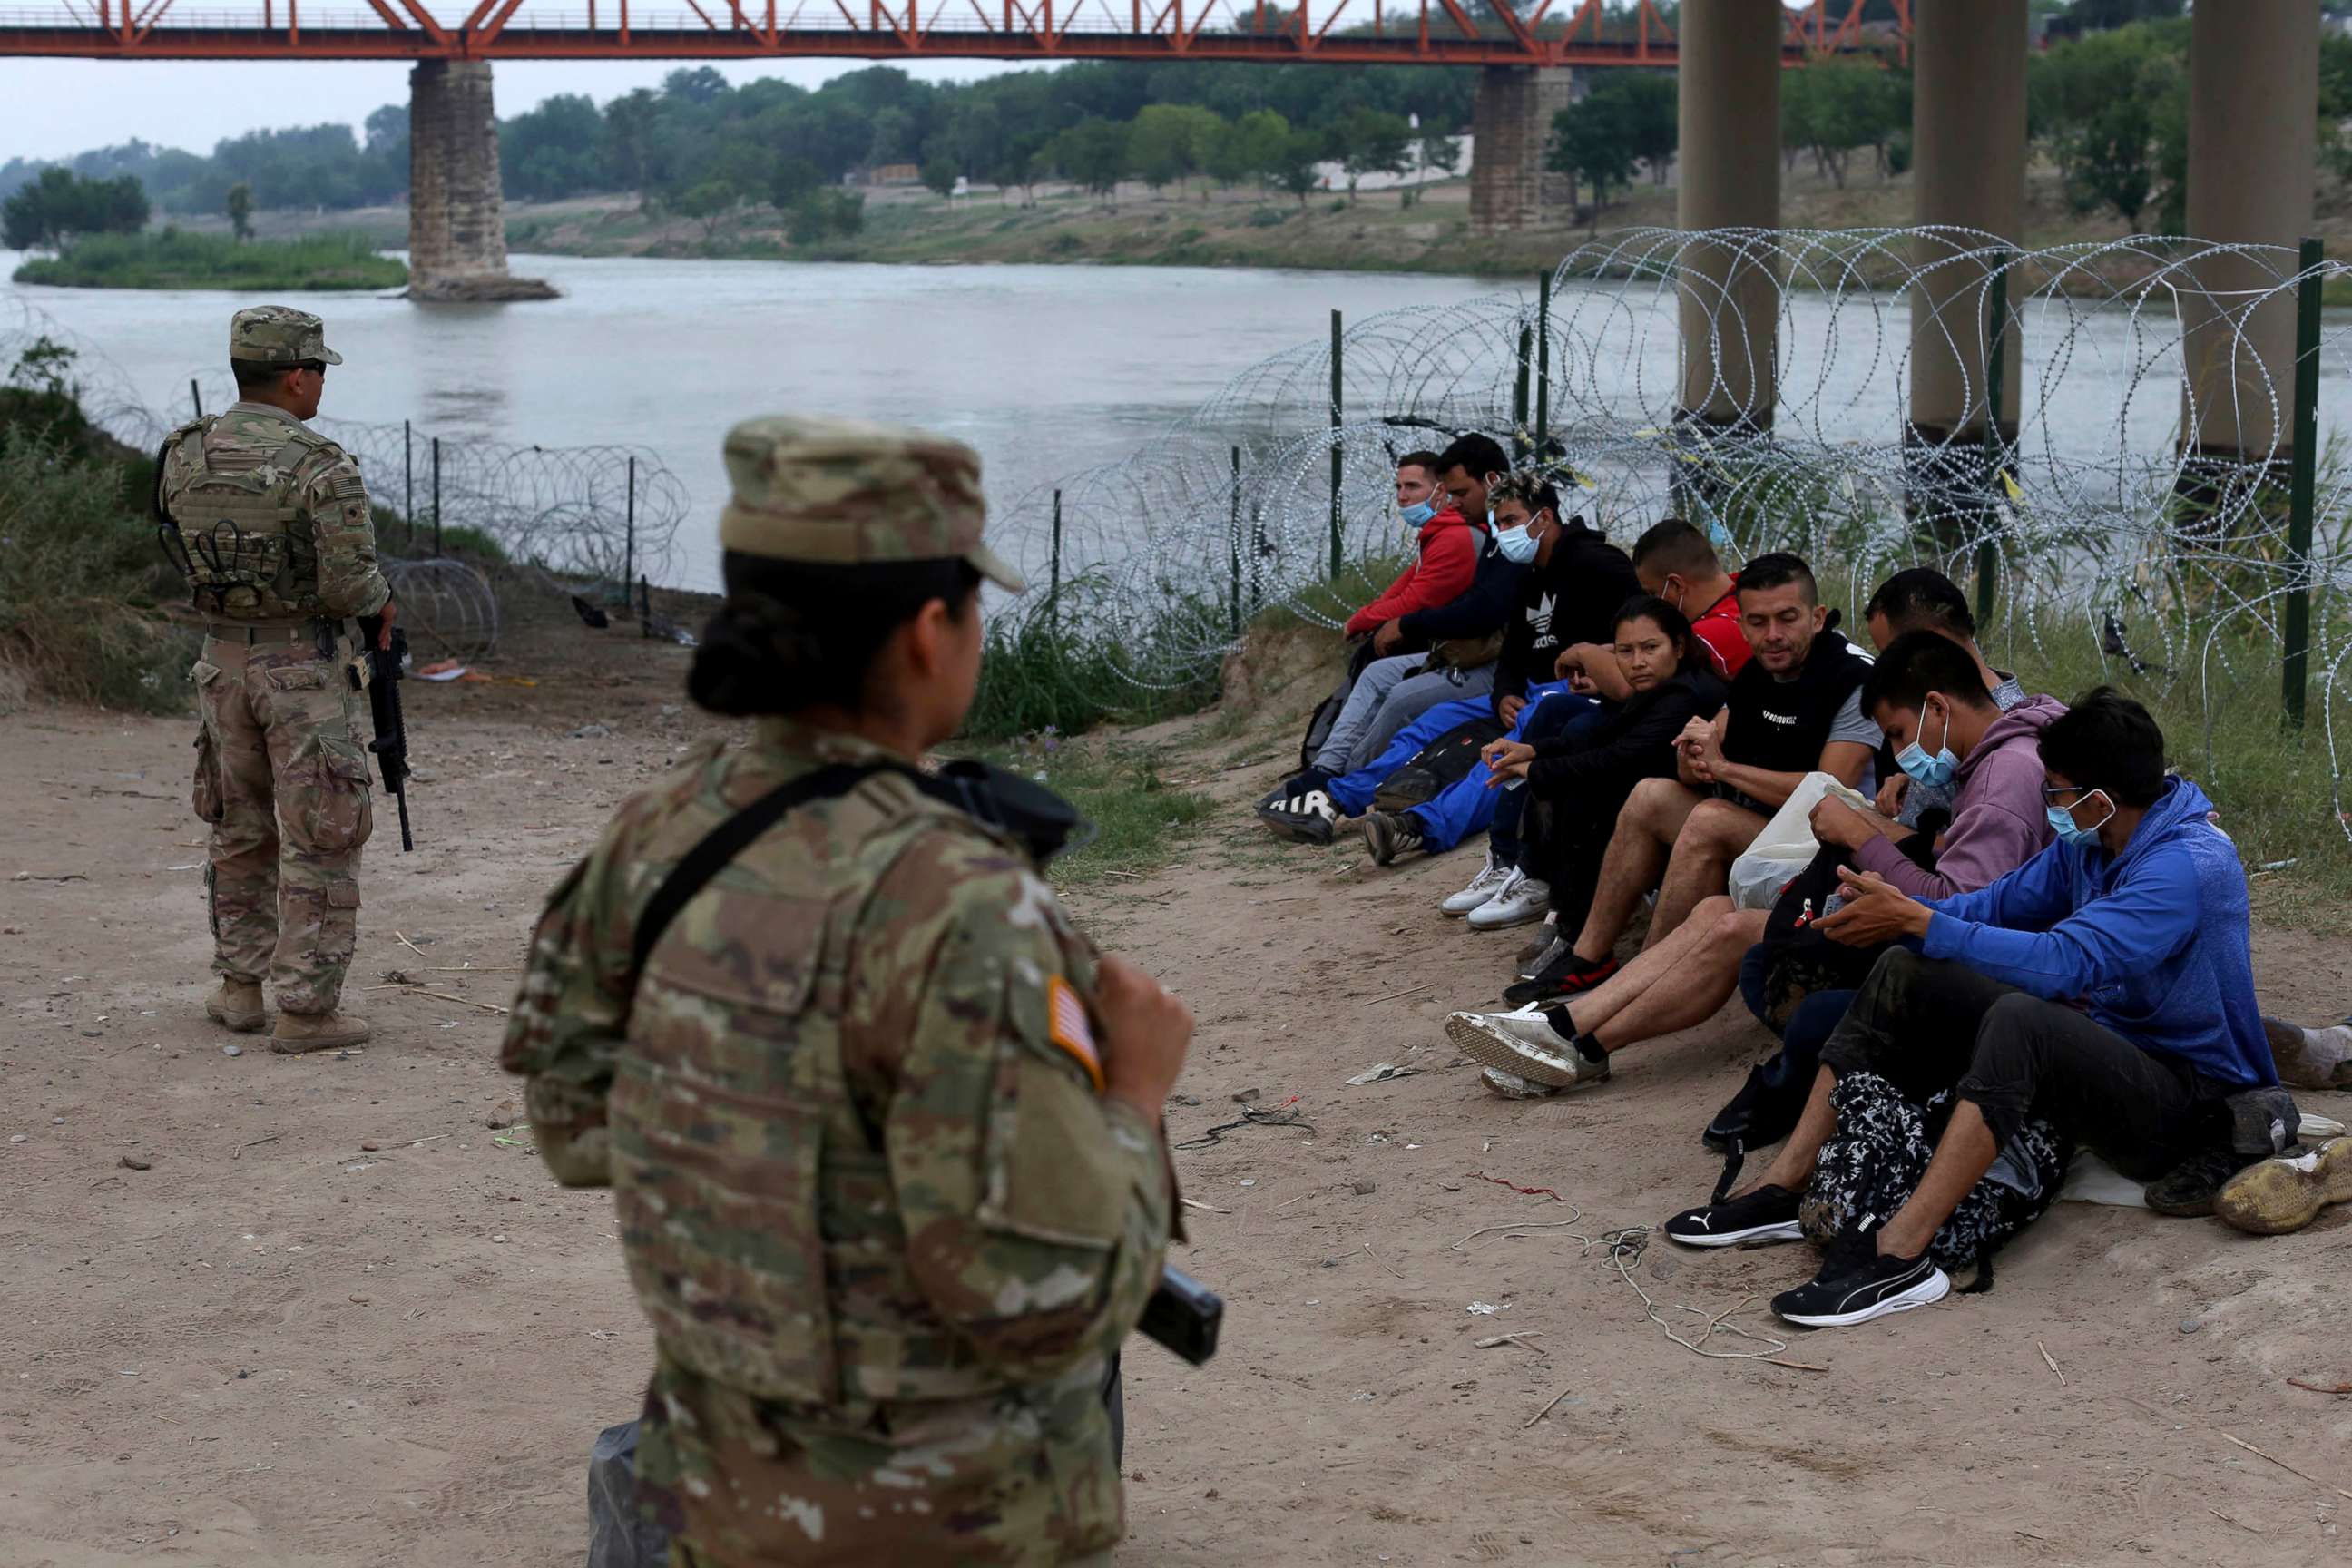 PHOTO: Migrants who had crossed the Rio Grande river into the U.S. are under custody of National Guard members as they await the arrival of U.S. Border Patrol agents in Eagle Pass, Texas, on May 20, 2022.